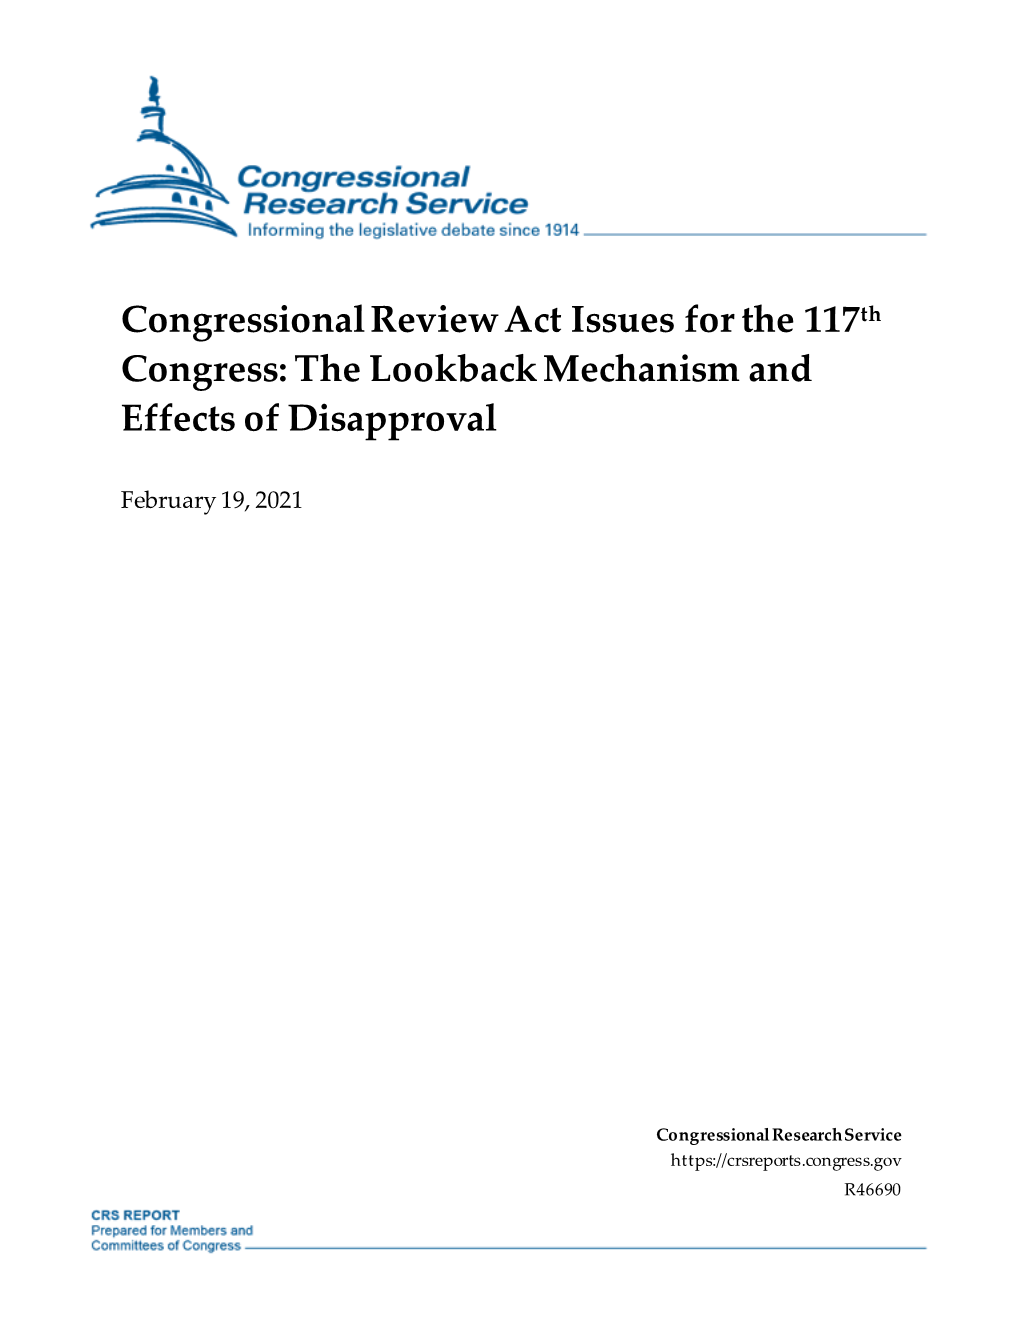 Congressional Review Act Issues for the 117Th Congress: the Lookback Mechanism and Effects of Disapproval